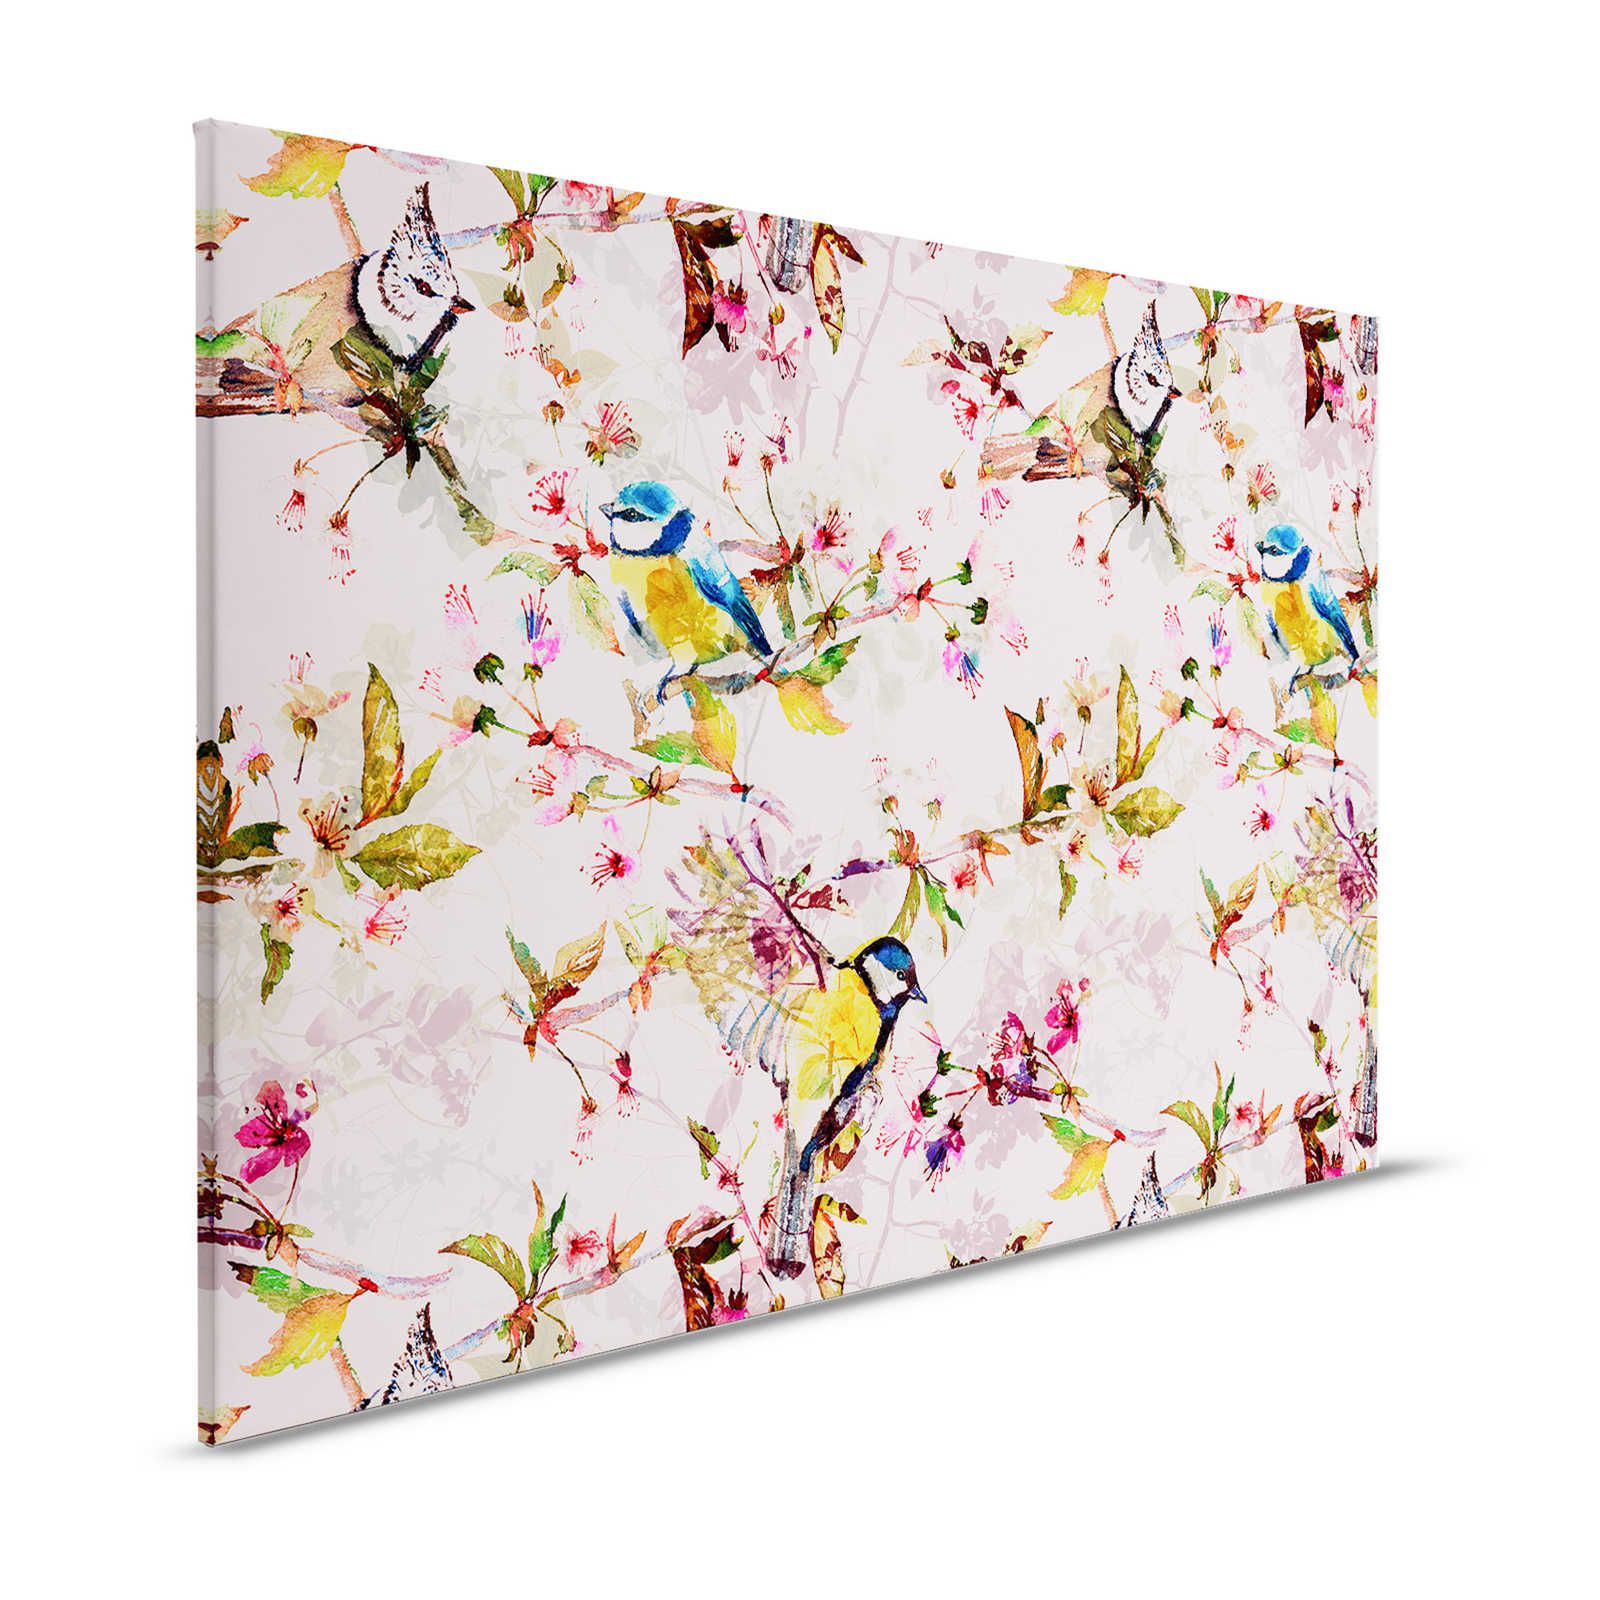 Birds Collage Style Canvas Painting | pink, yellow - 1.20 m x 0.80 m
